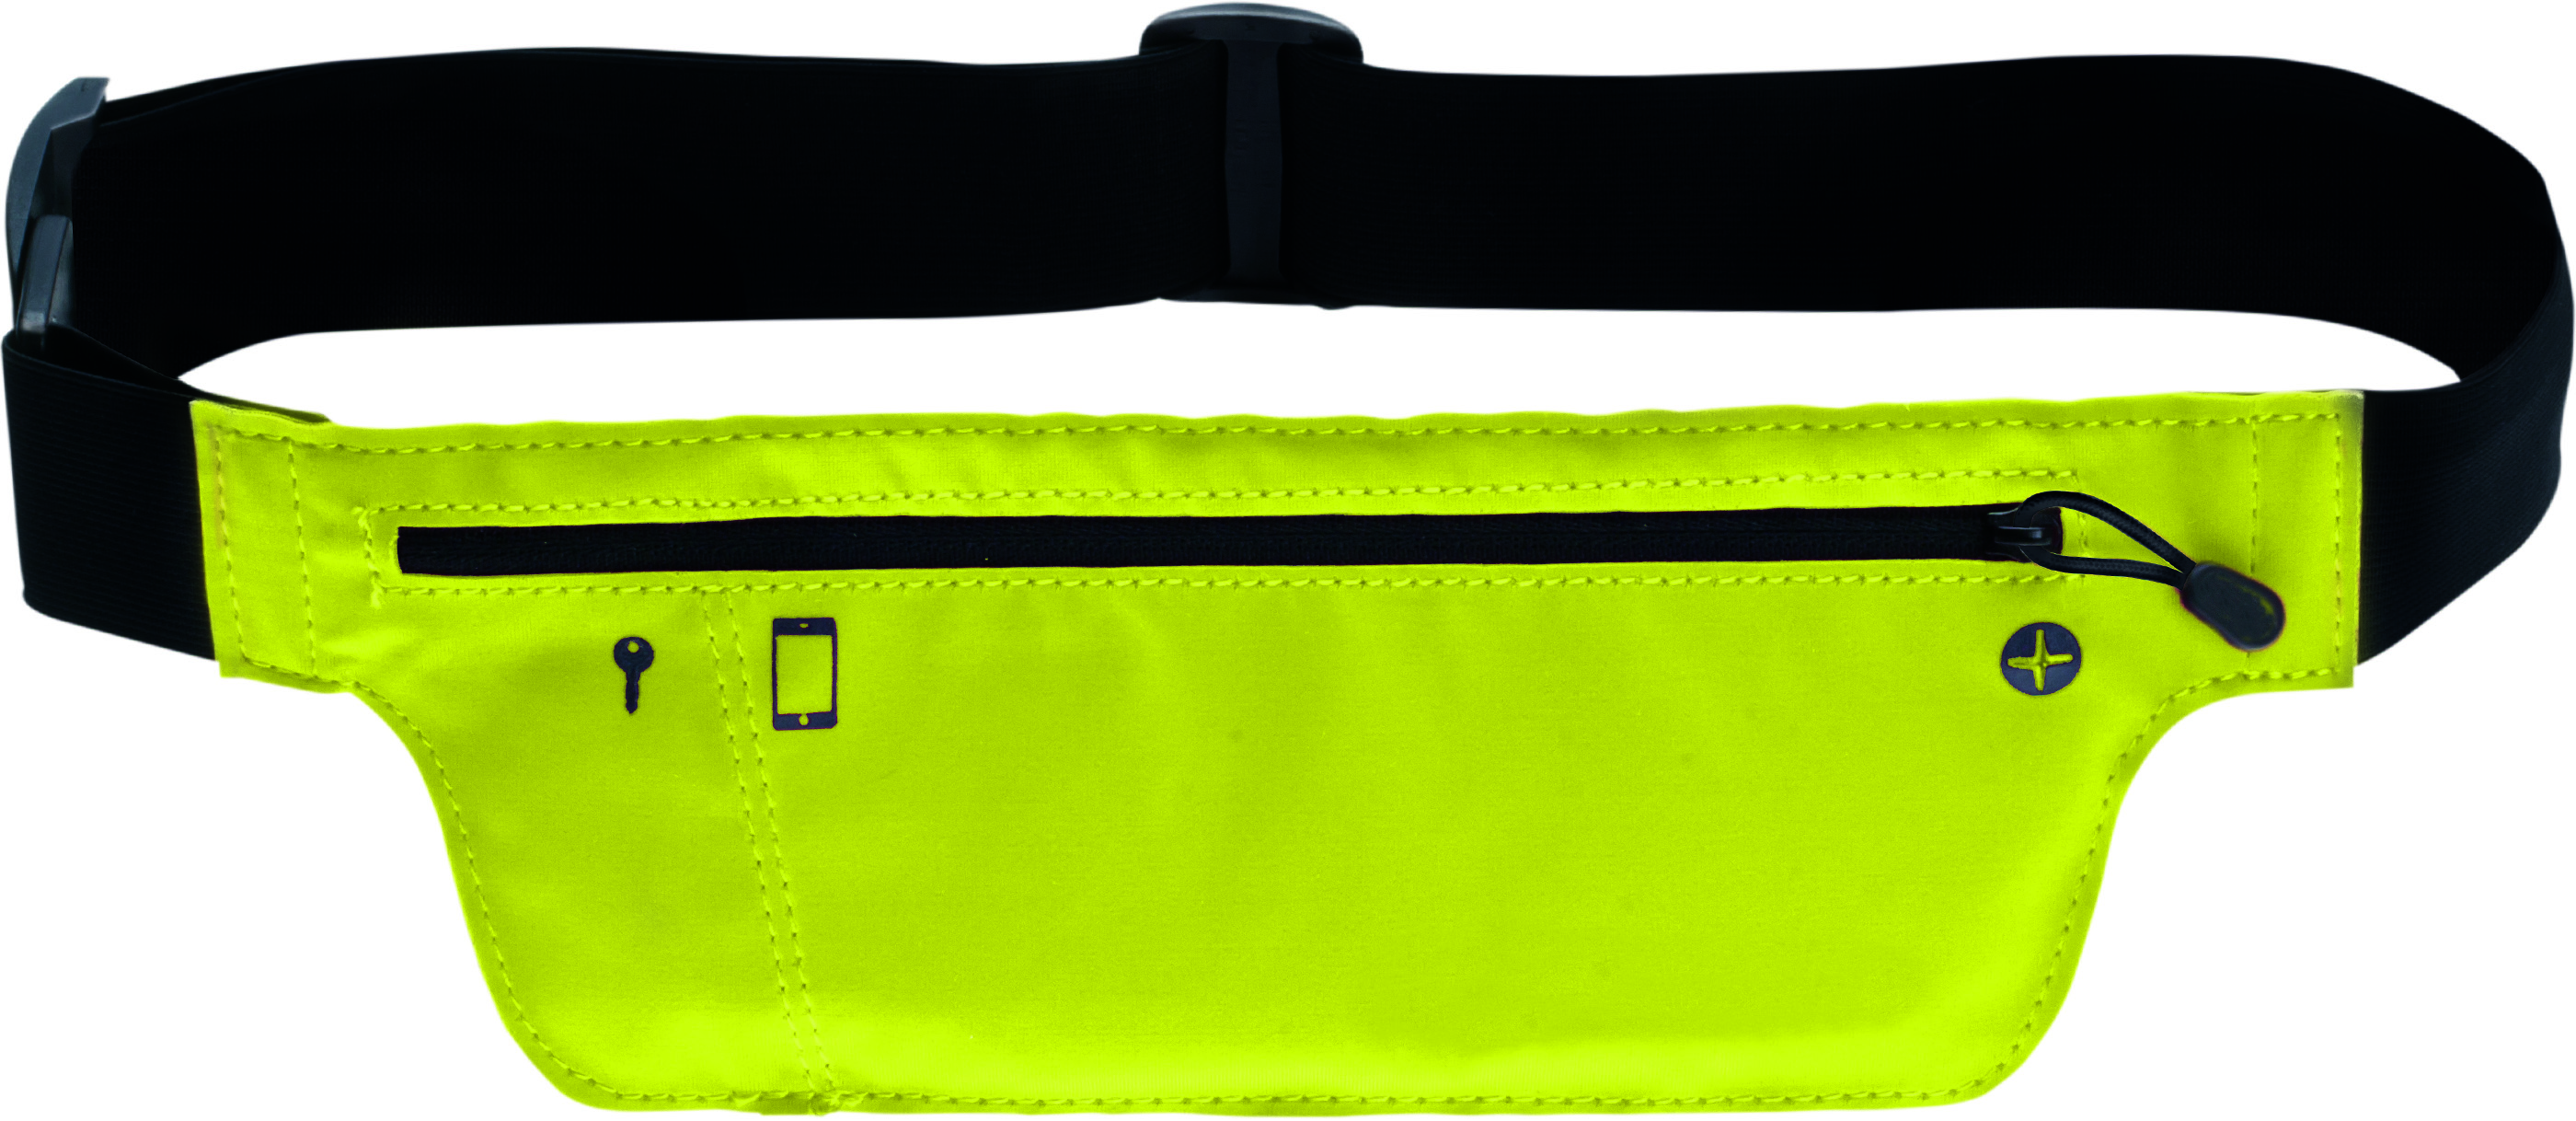 neon waist bag for leisure, travel and sport 